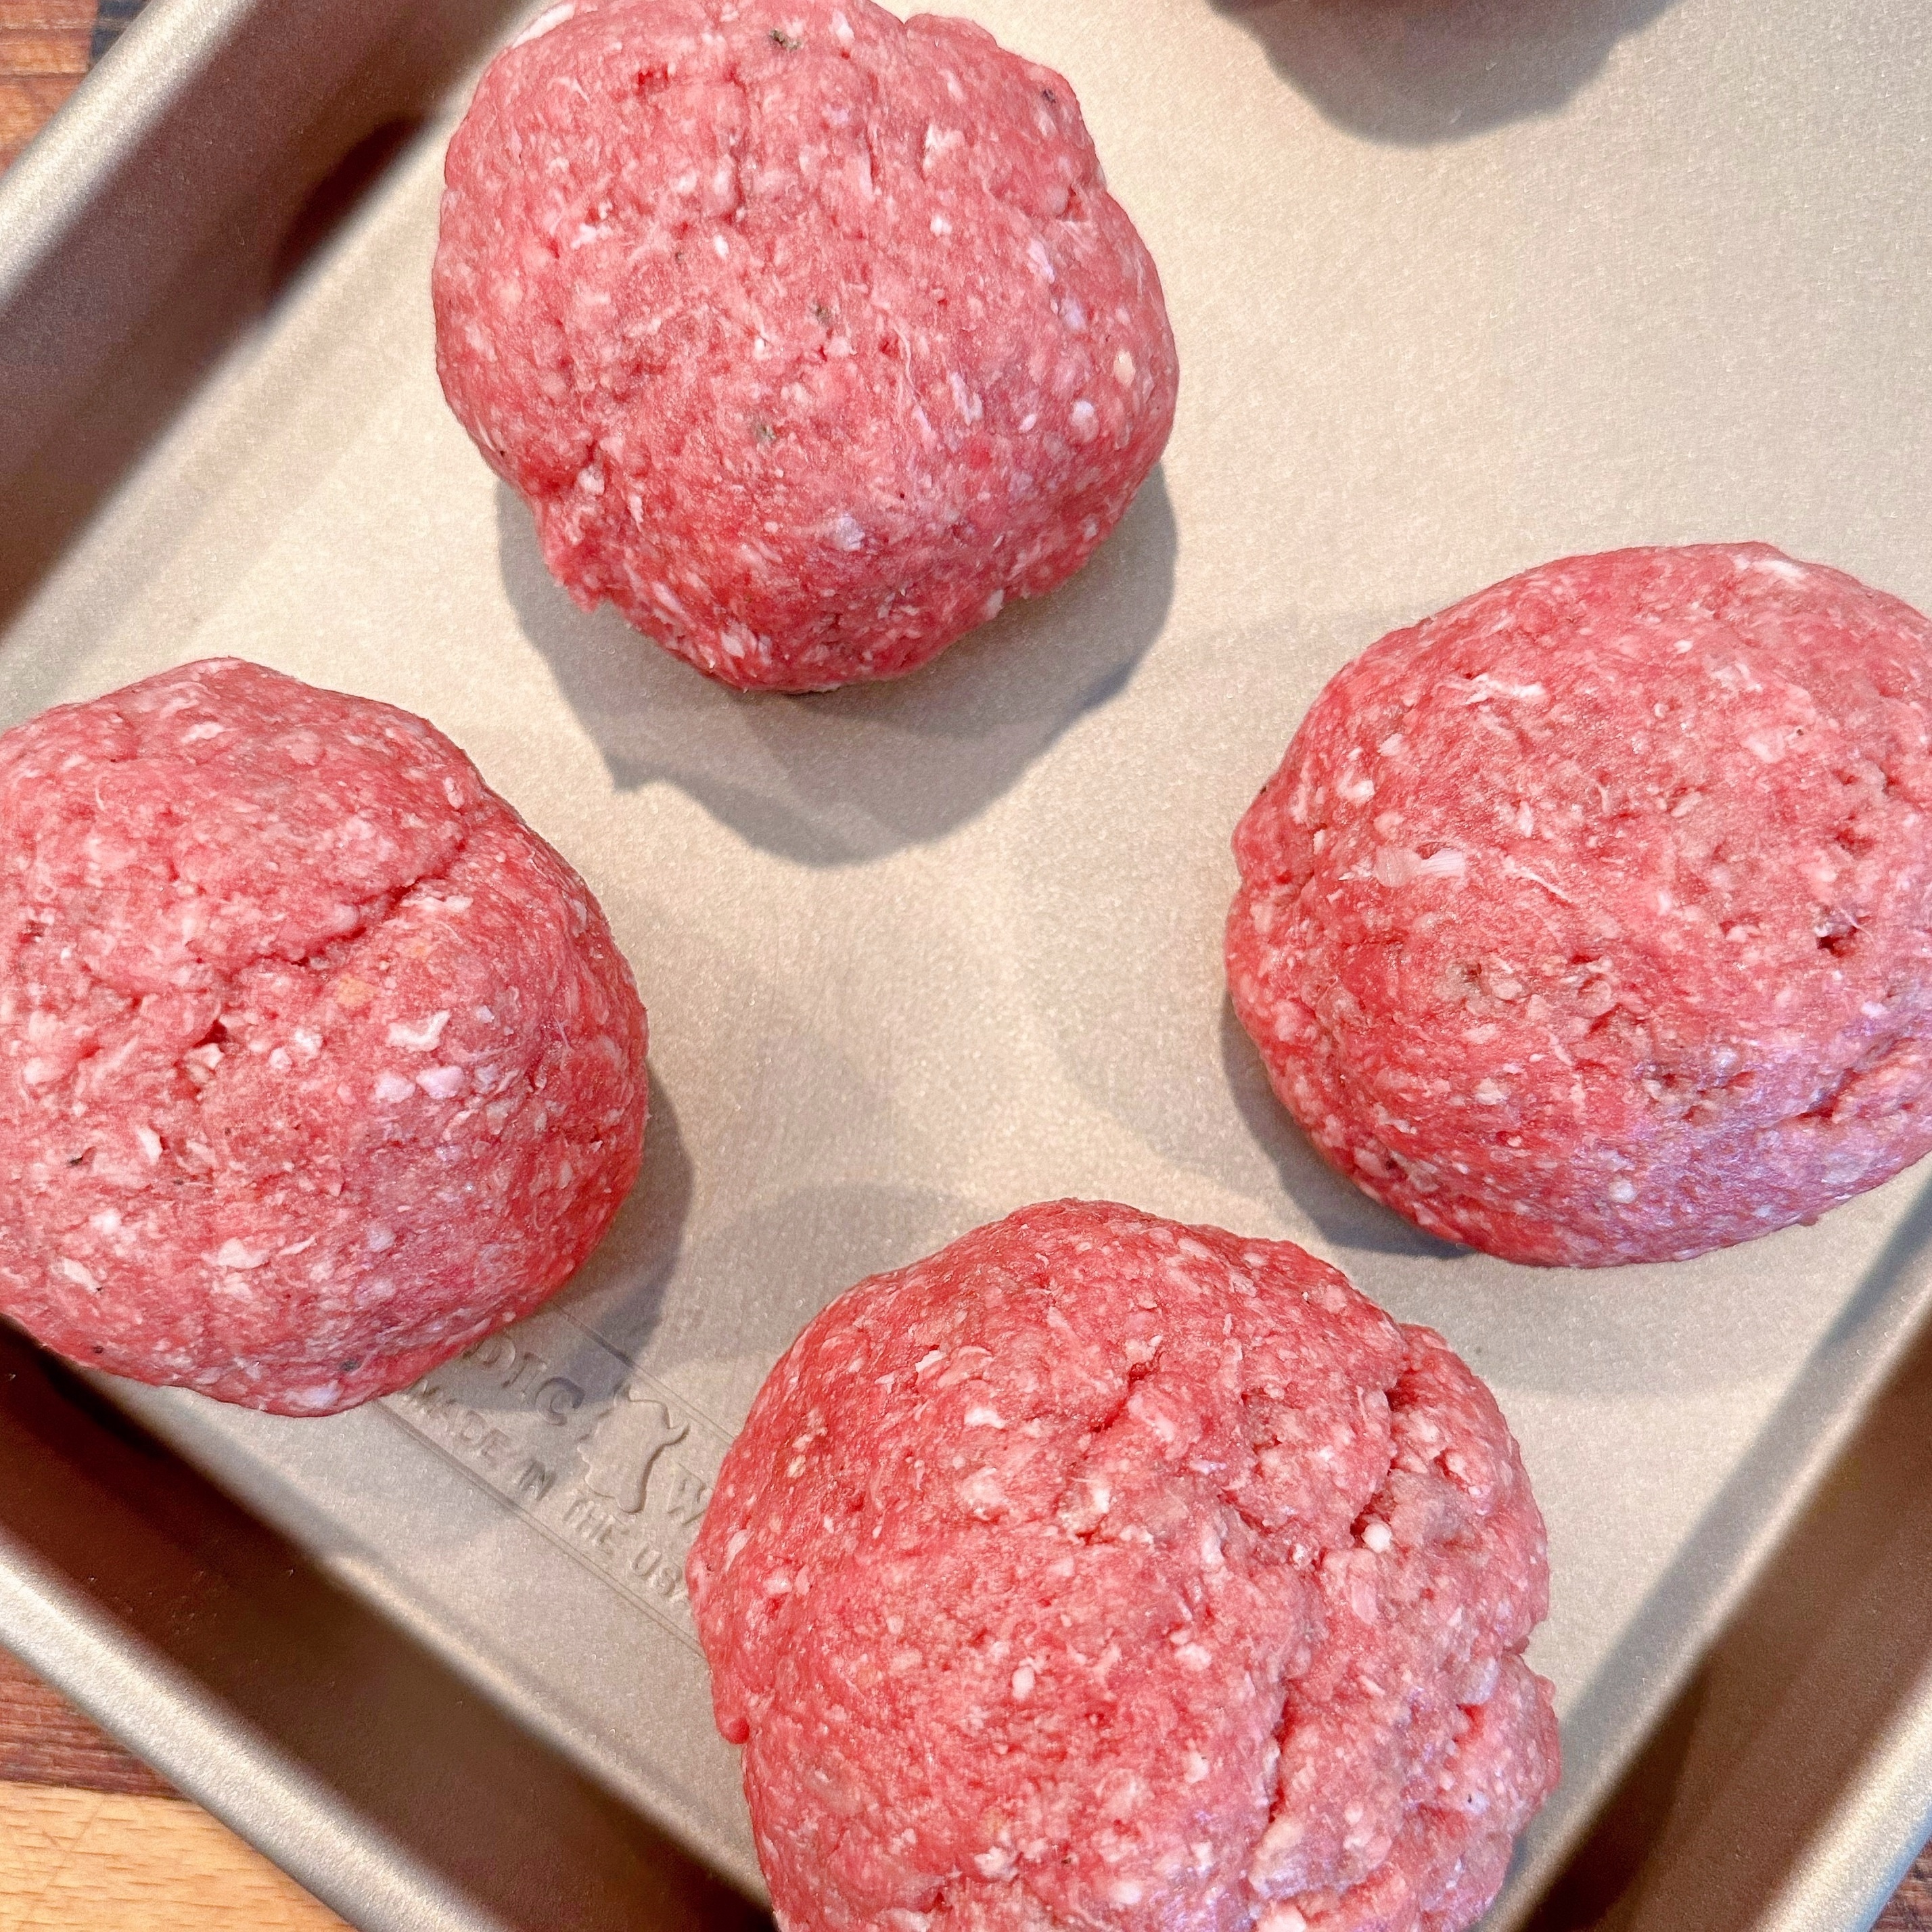 Ground chuck formed into balls for the smash burgers.